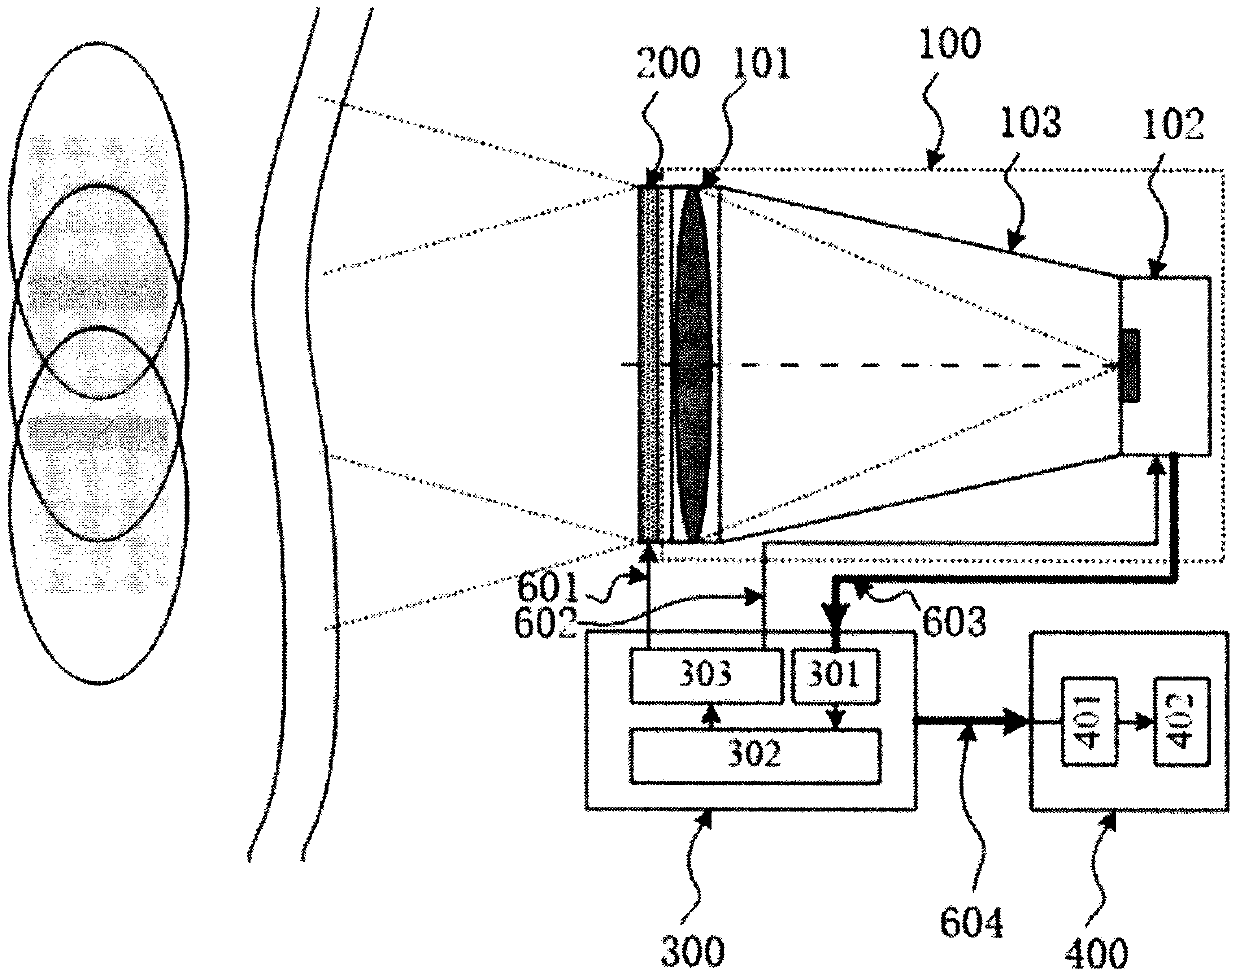 Telescopic imaging device and method